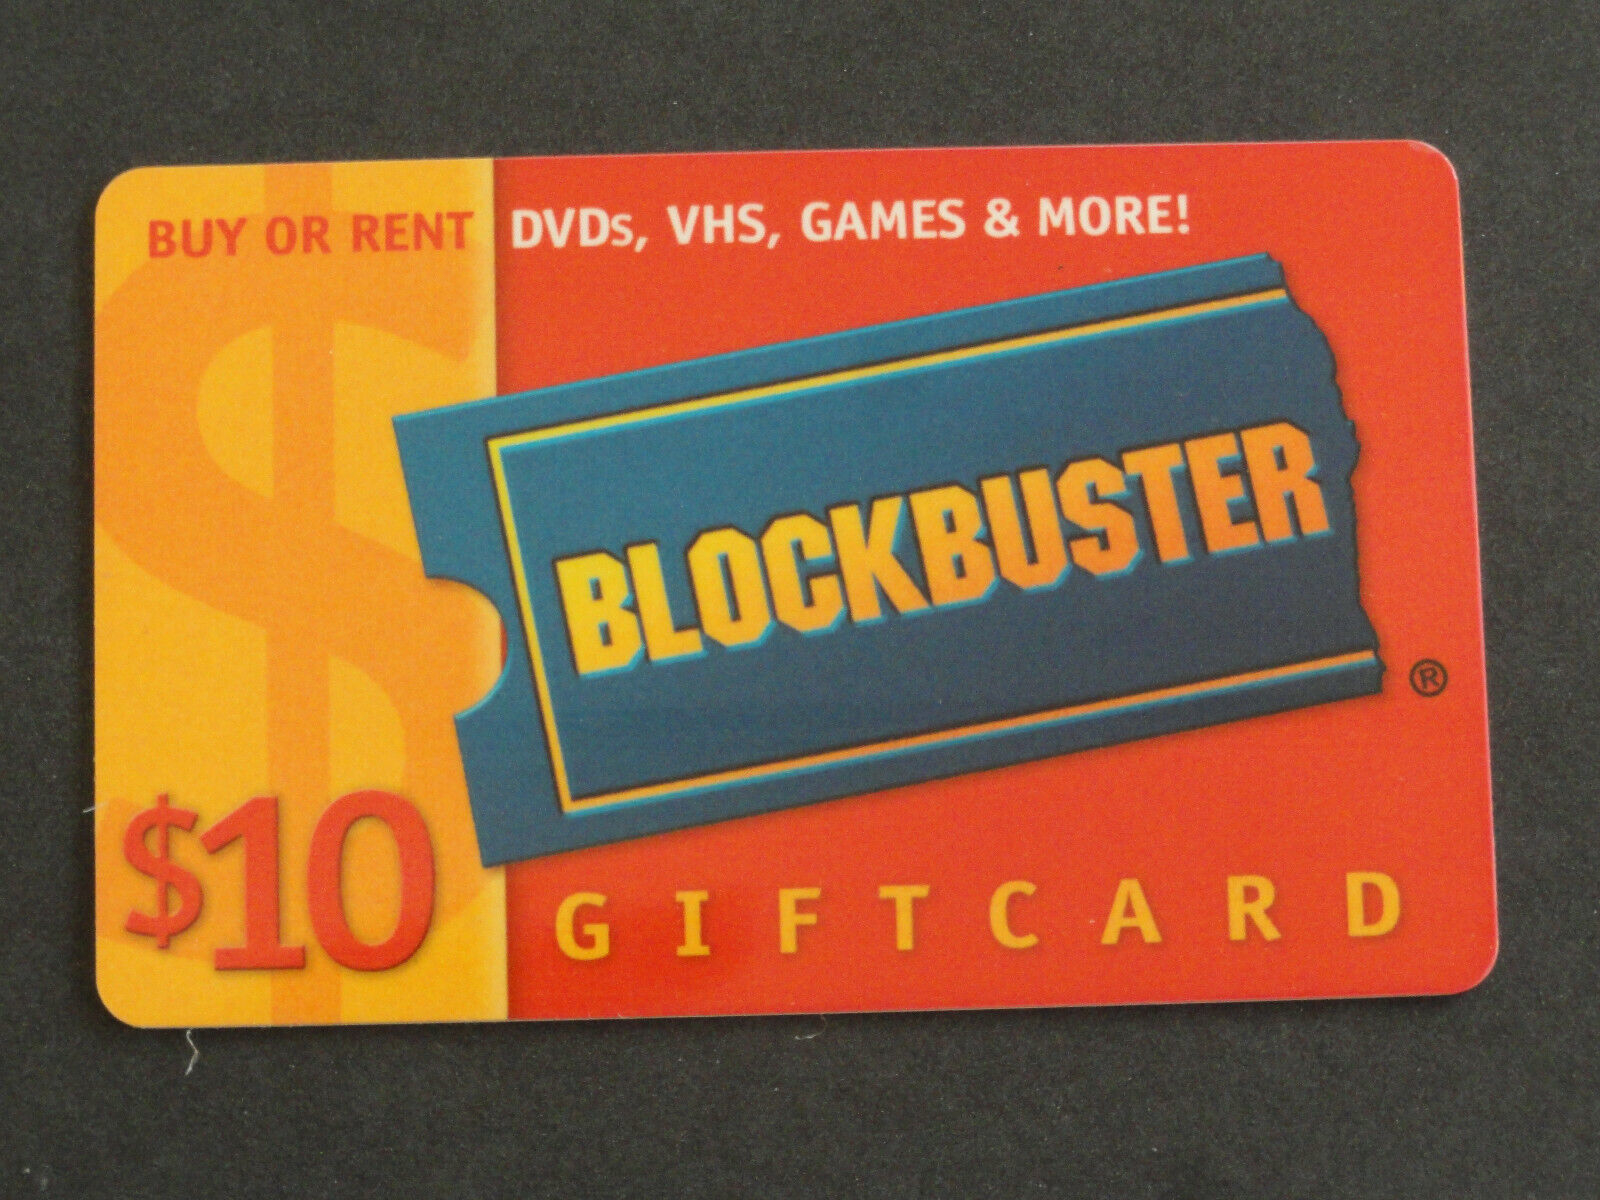 A Blockbuster gift card